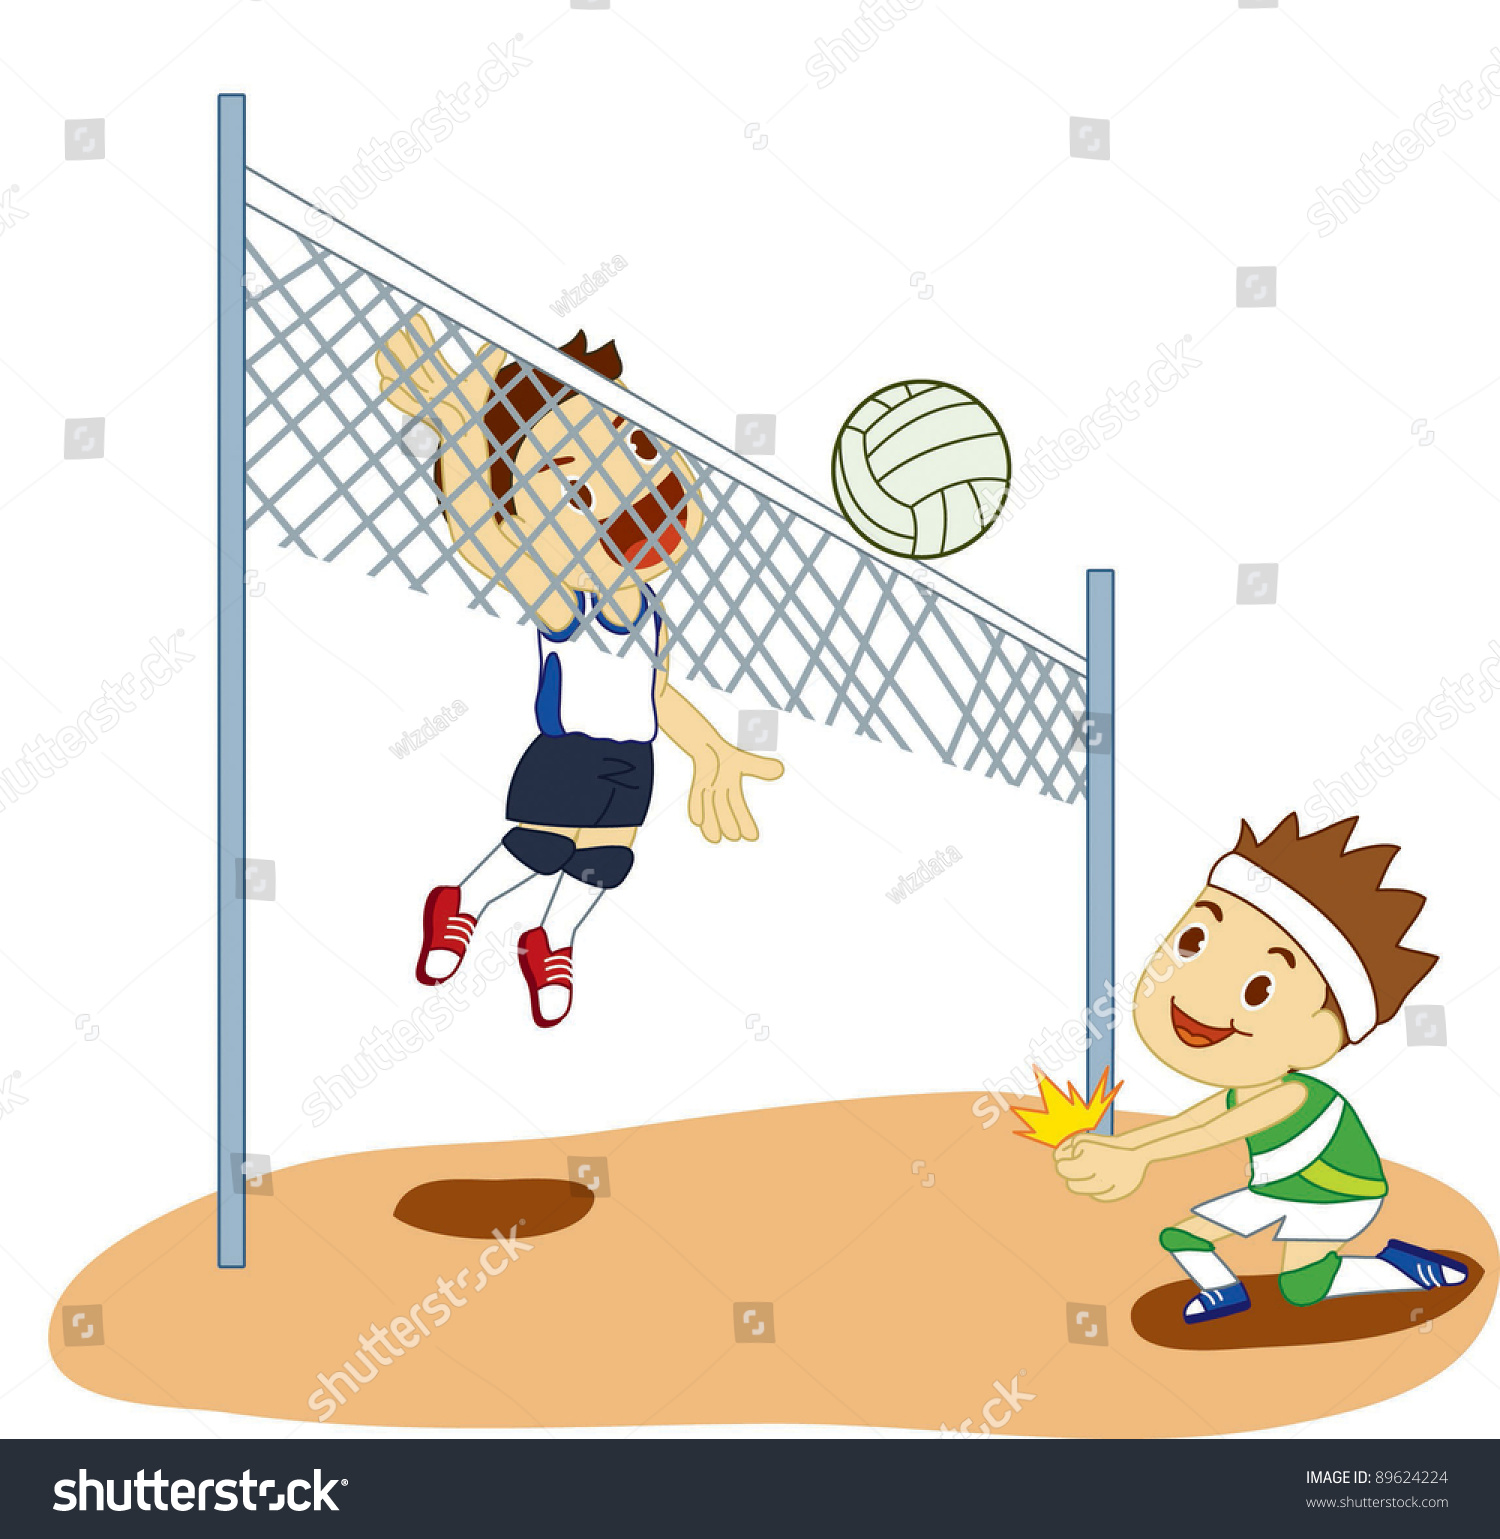 clipart volleyball game - photo #11